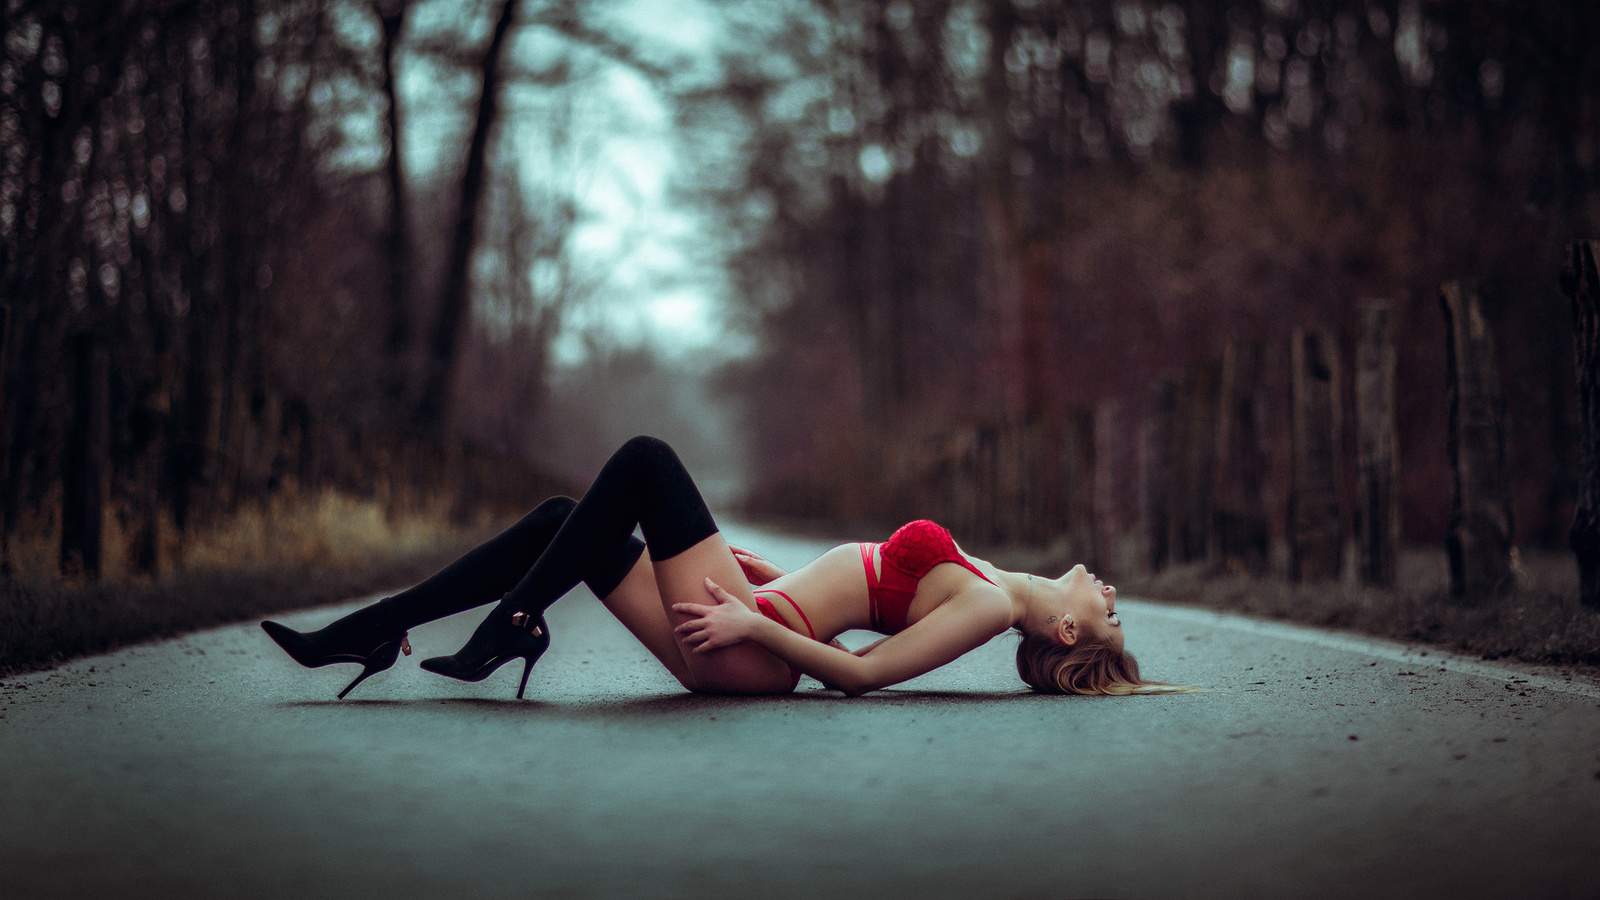 women, road, brunette, trees, ass, red lingerie, blonde, closed eyes, high heels, black stockings, women outdoors, arched back, lying on back, belly, depth of field